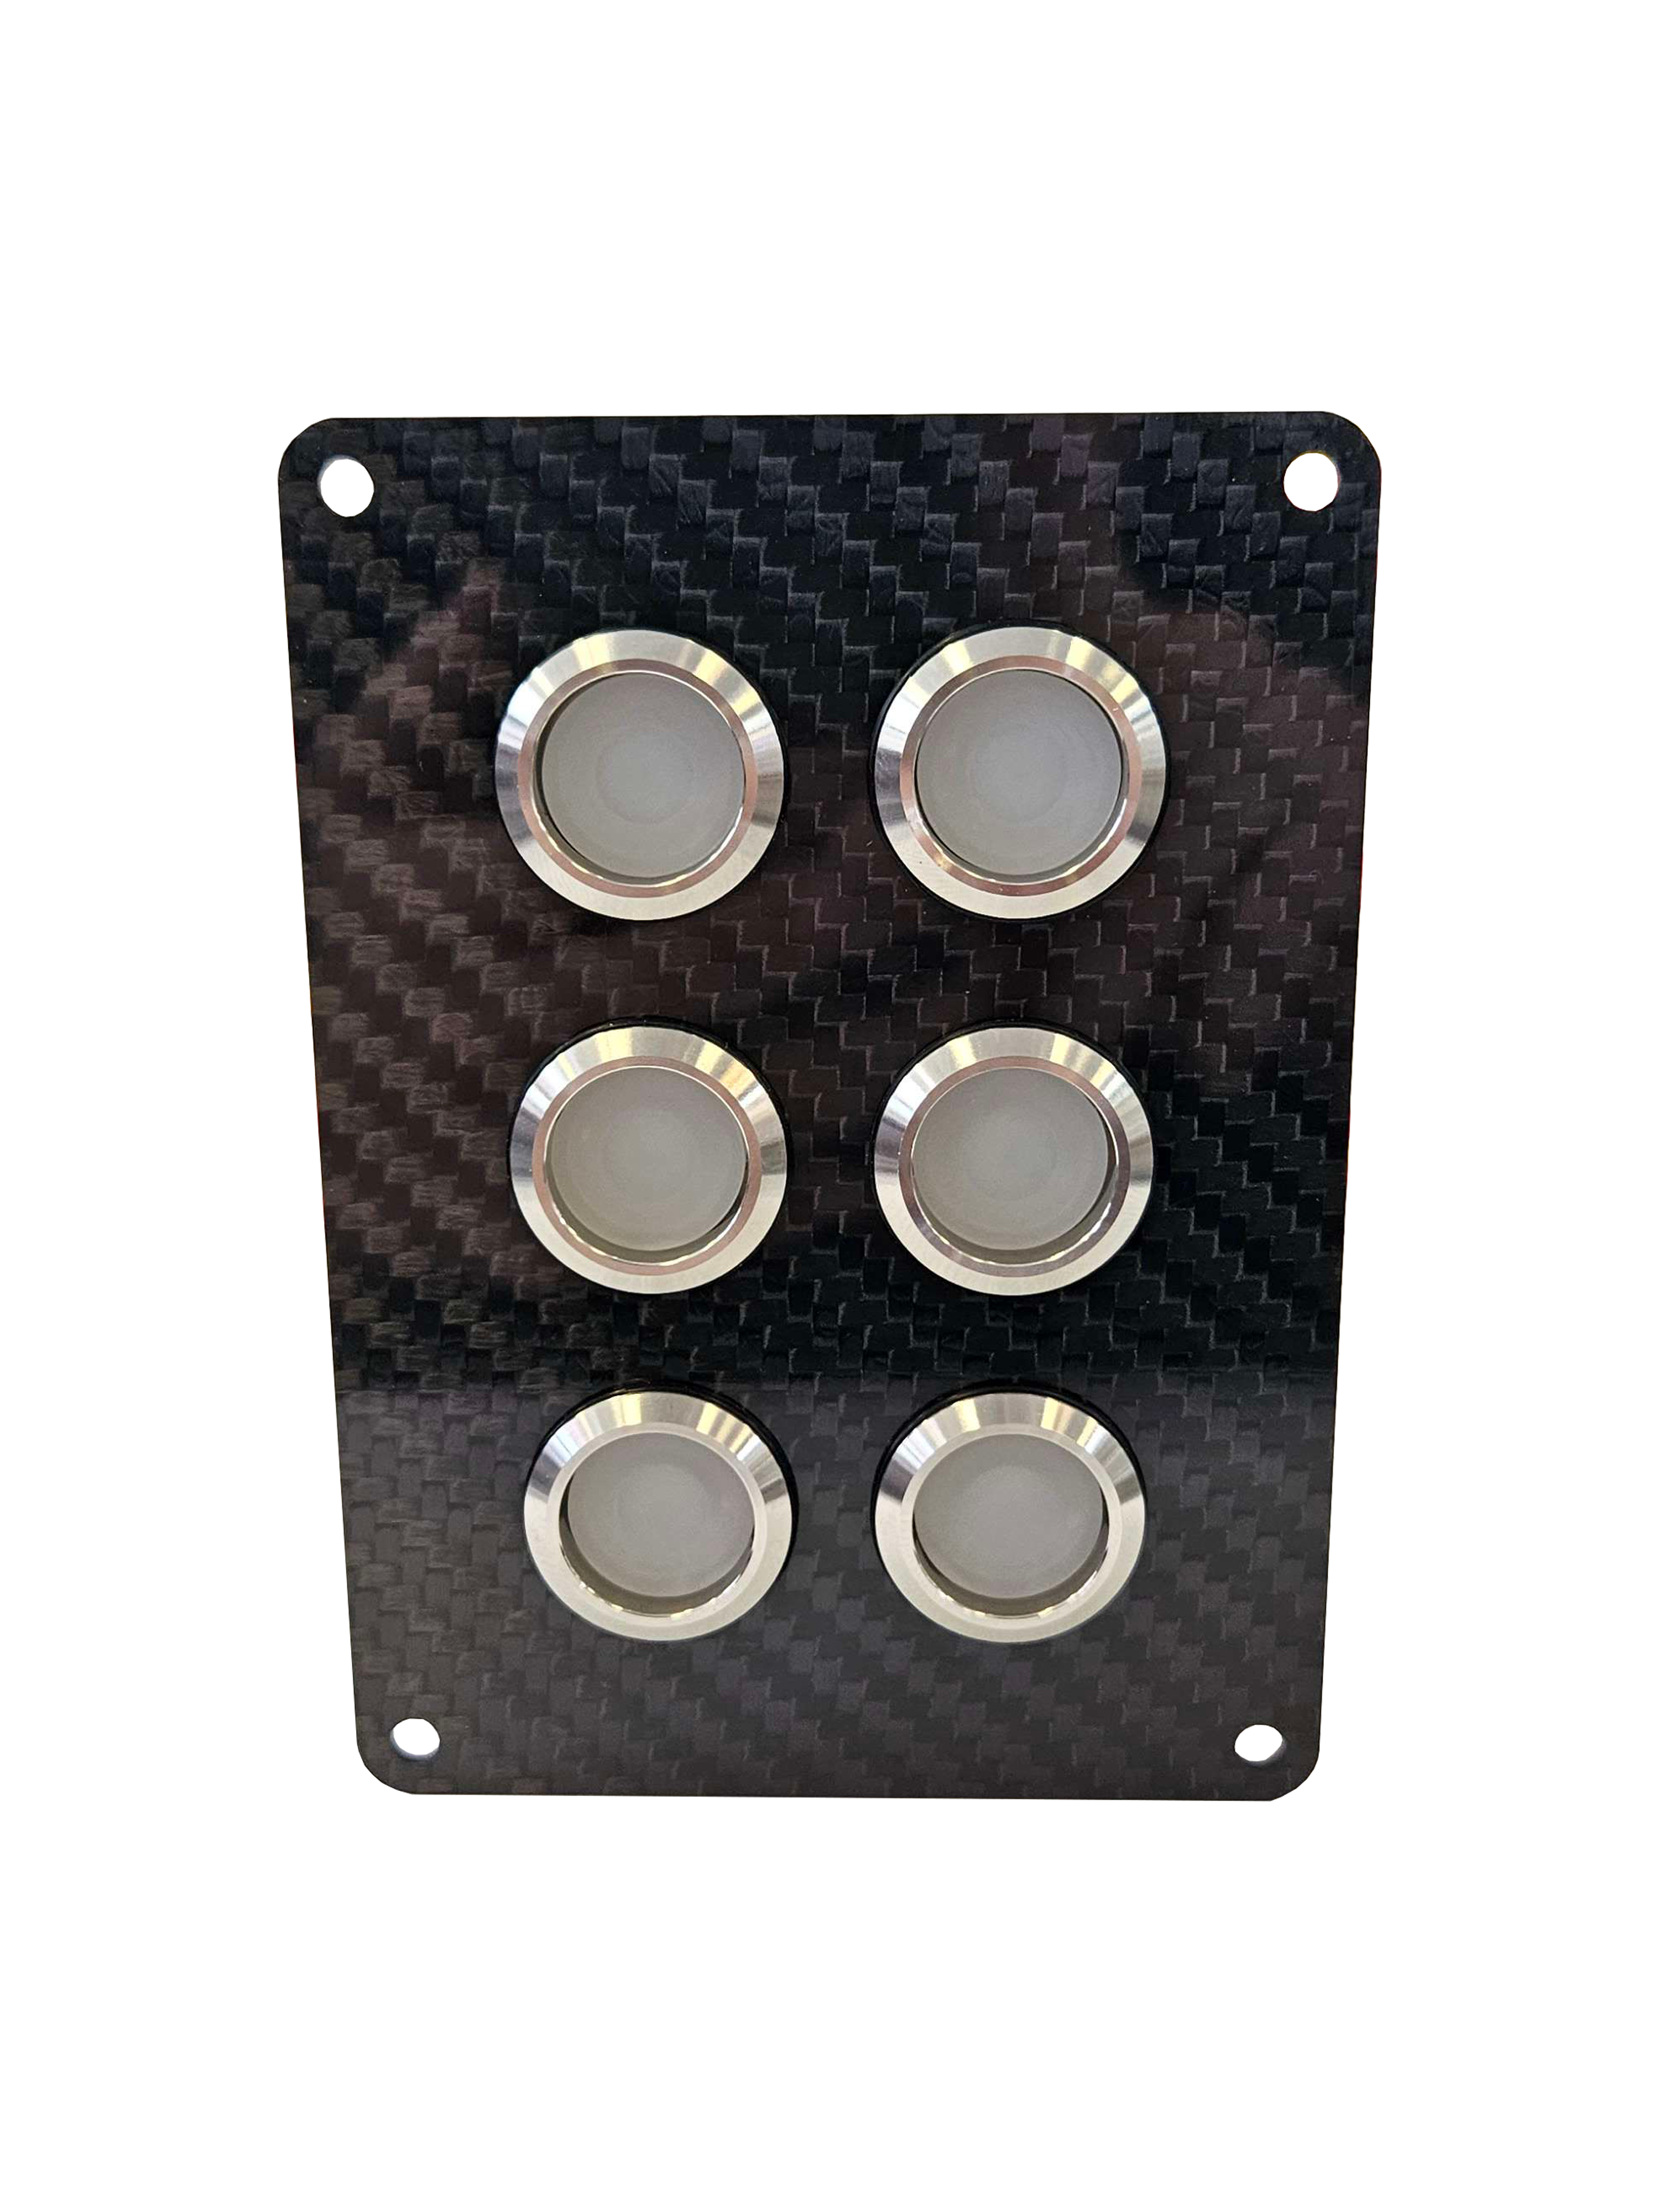 6 gang S.B.S. carbon fibre switch panel with 20A backlit switches